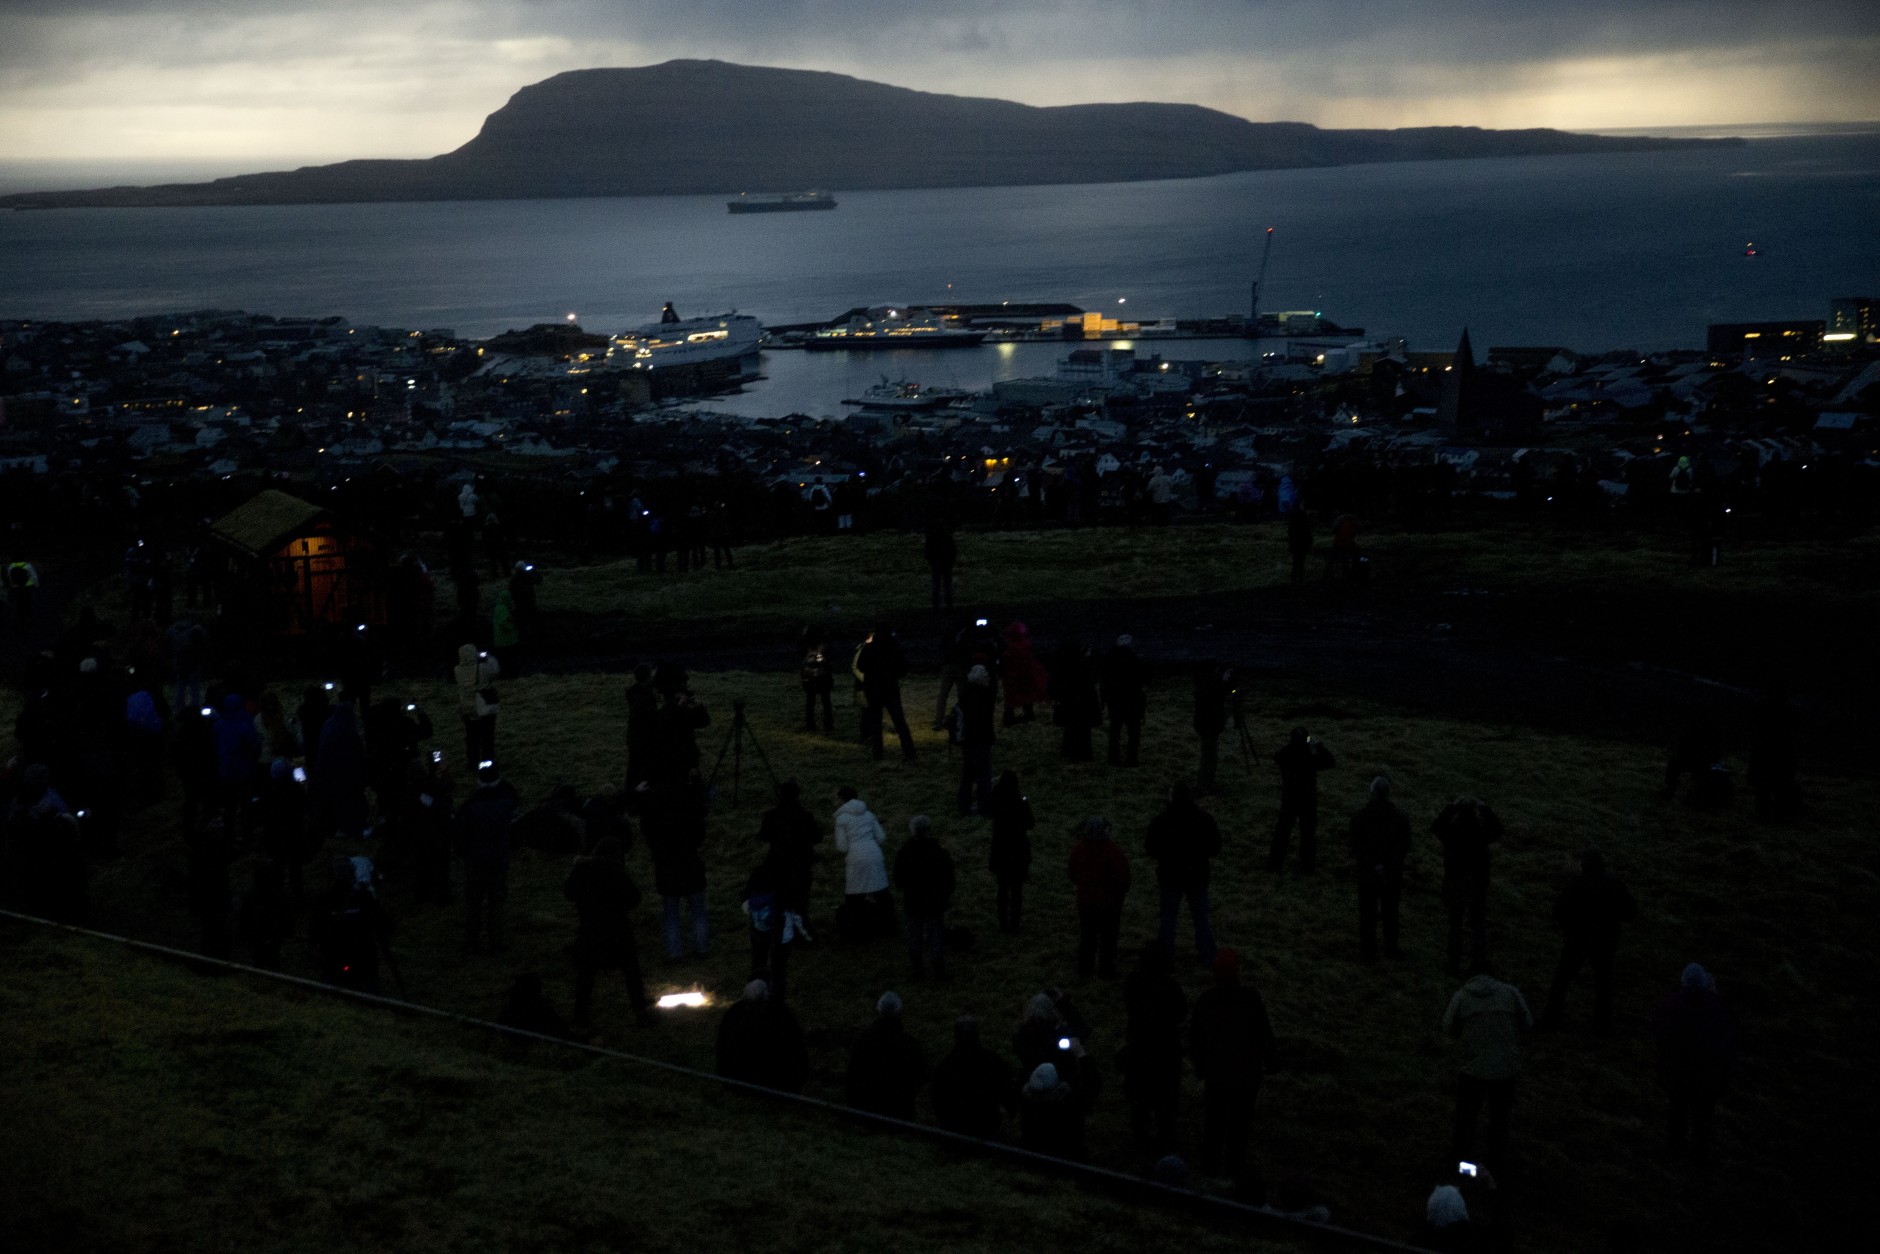 People watch in darkness during the totality of a solar eclipse on as seen from a hill beside a hotel on the edge of the city overlooking Torshavn, the capital city of the Faeroe Islands, Friday, March 20, 2015. For months, even years, accommodation on the remote Faeroe Islands has been booked out by fans who don't want to miss an almost three-minute-long astronomical sensation. Now they just have to hope the clouds will blow away so they can fully experience Friday's brief total solar eclipse.  (AP Photo/Matt Dunham)